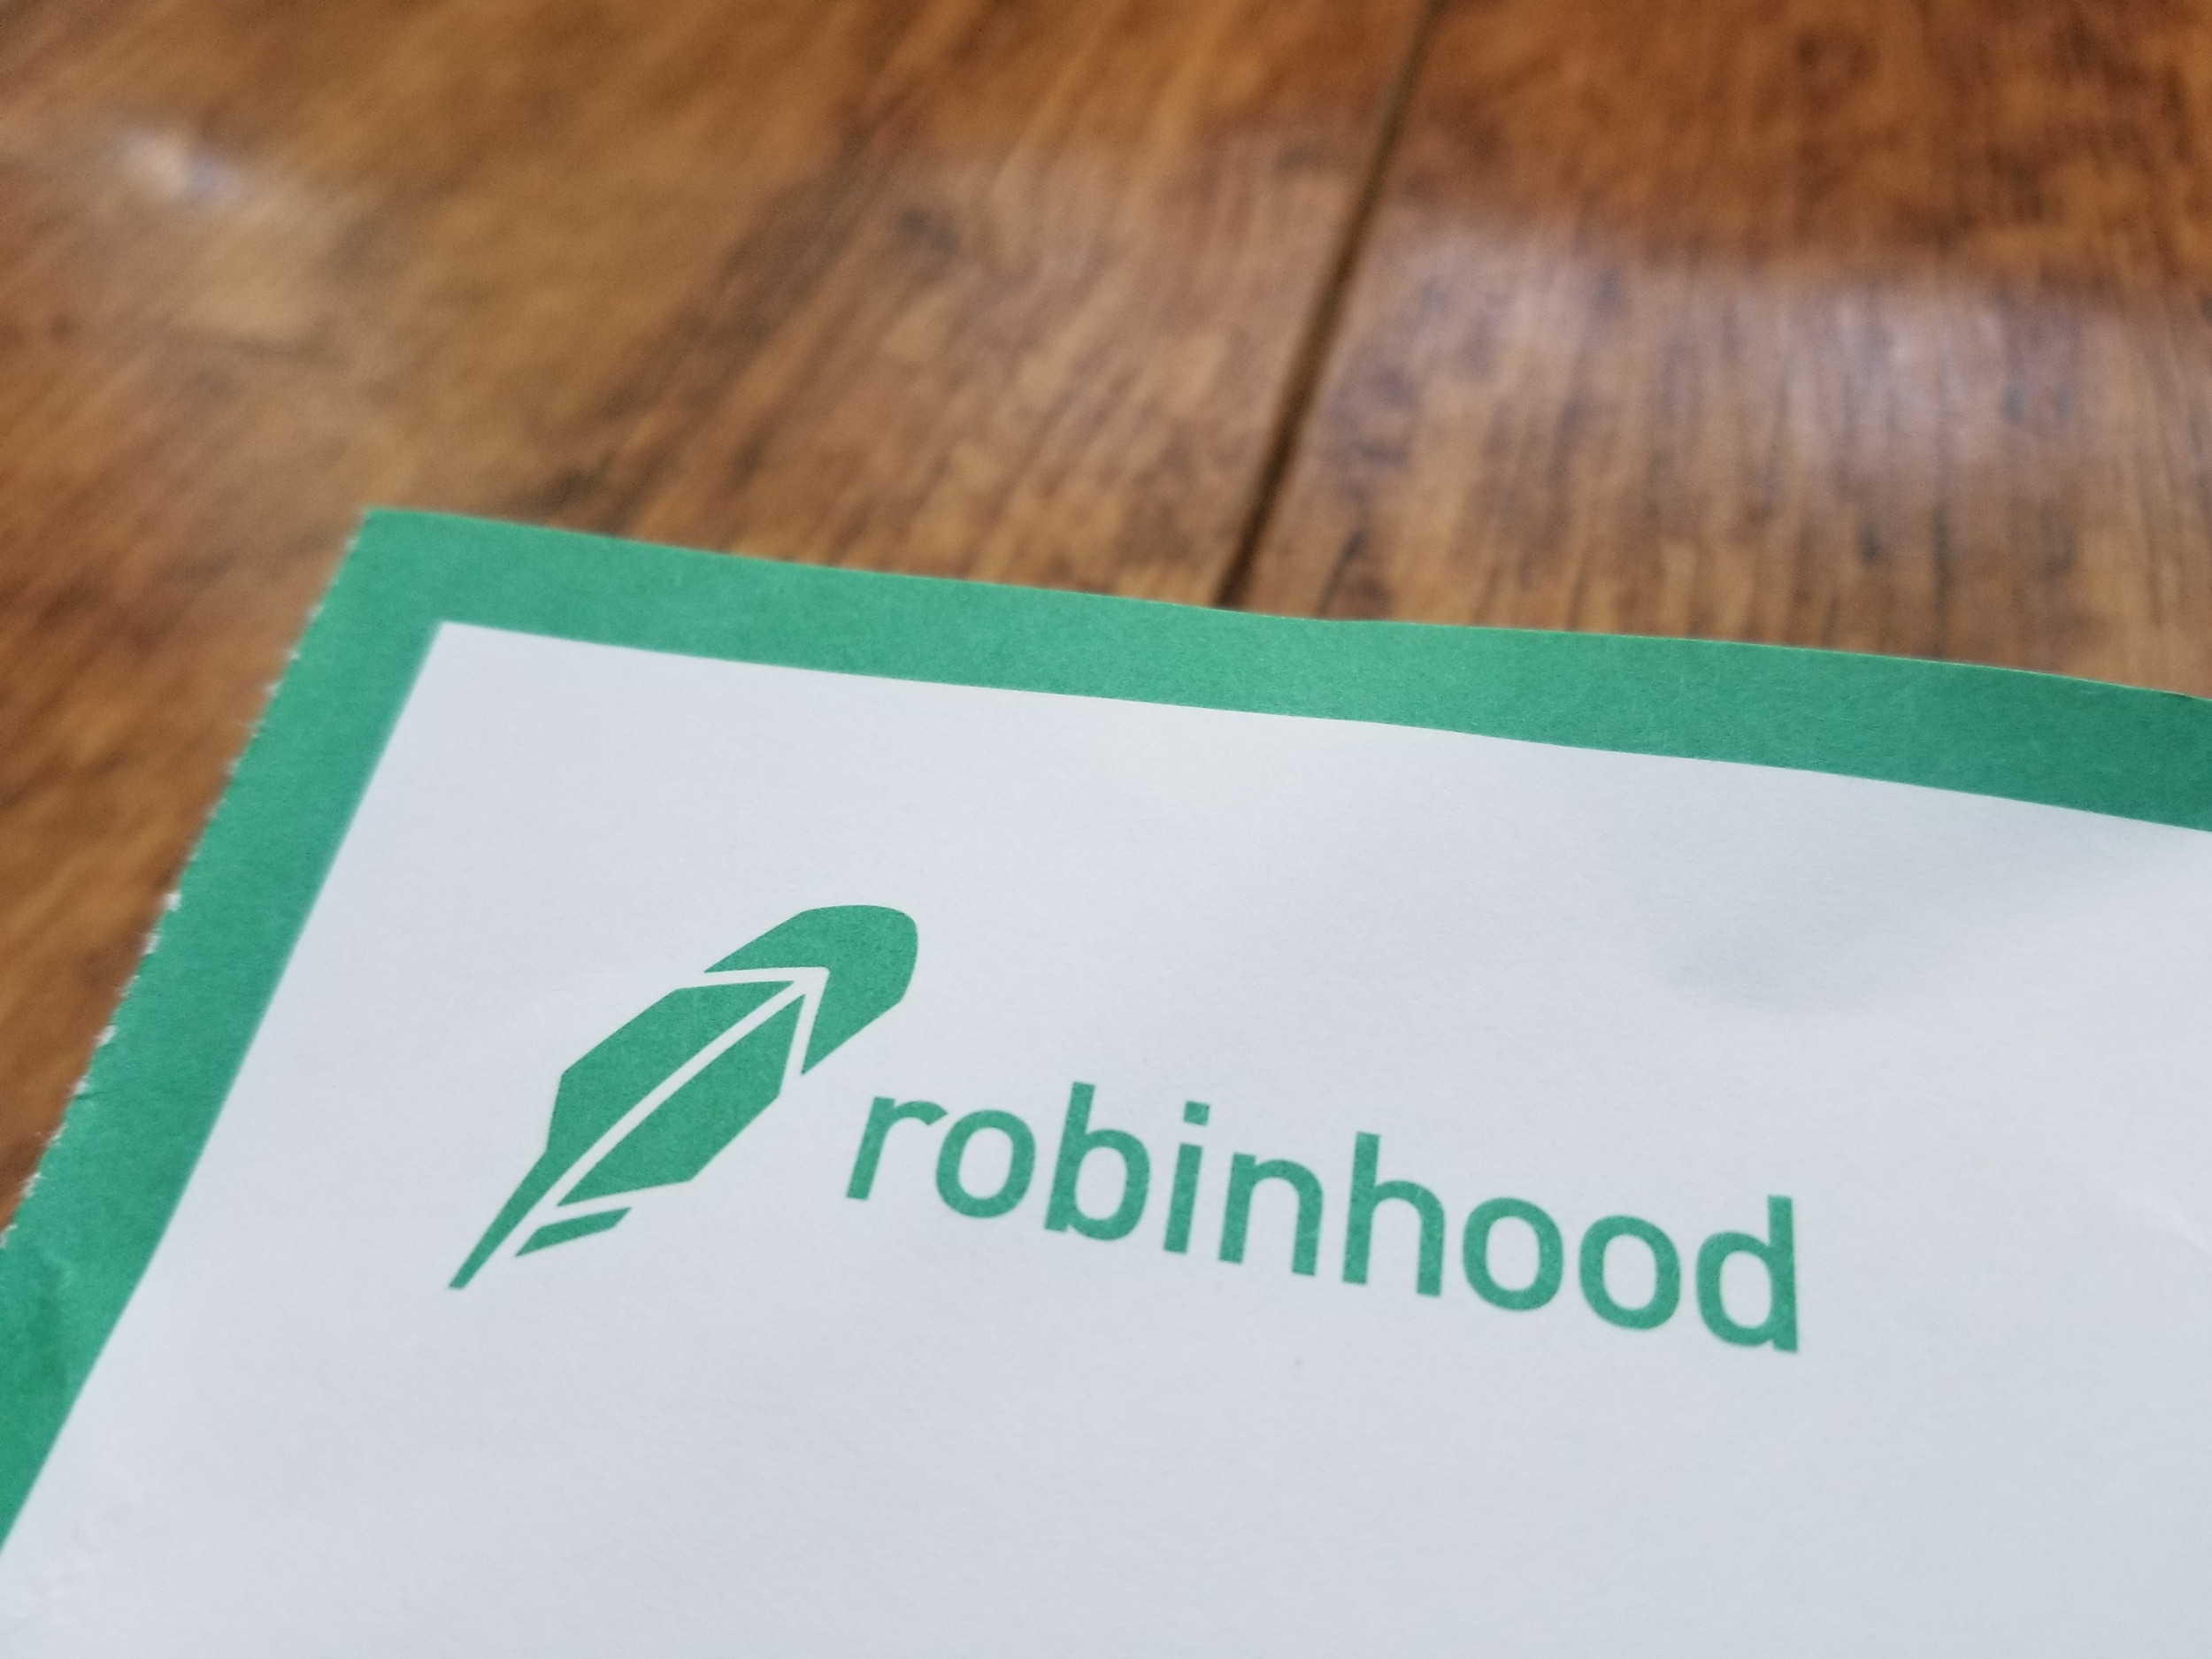 Twitter Freaked Out Over Robinhood Selling Its Trade Flow. But the